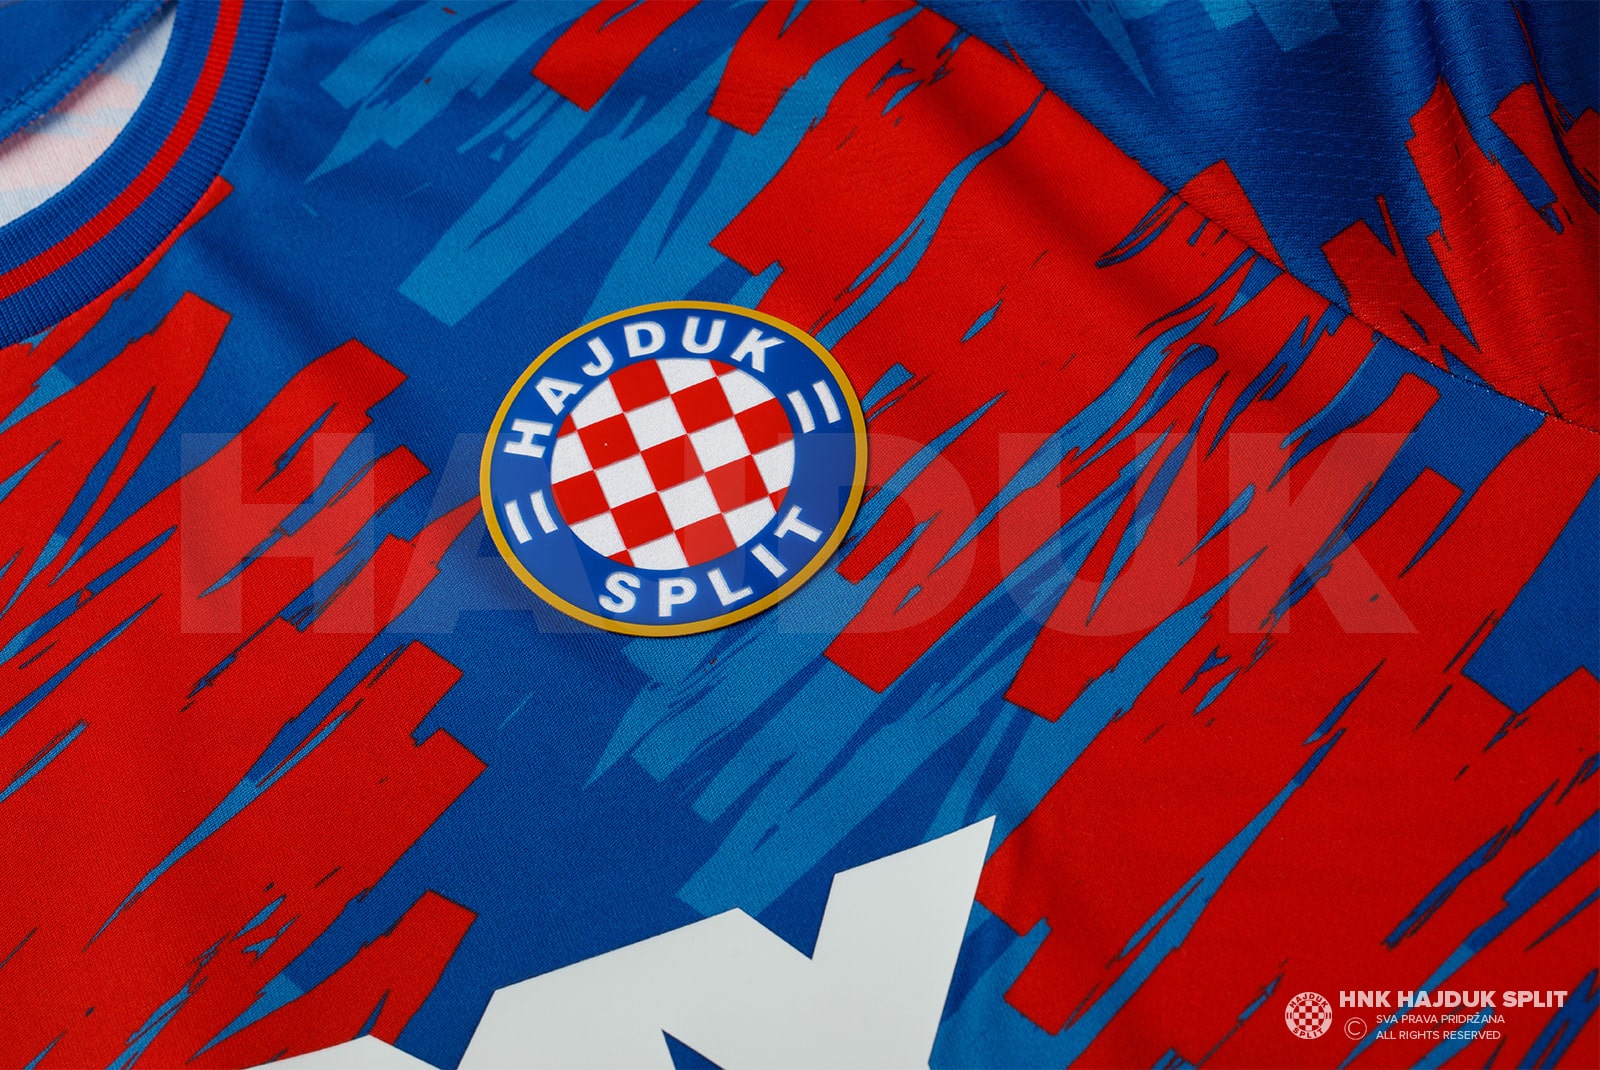 Authentic home jersey Hajduk Split 2020/21 - Other clubs - Other clubs -  Fans